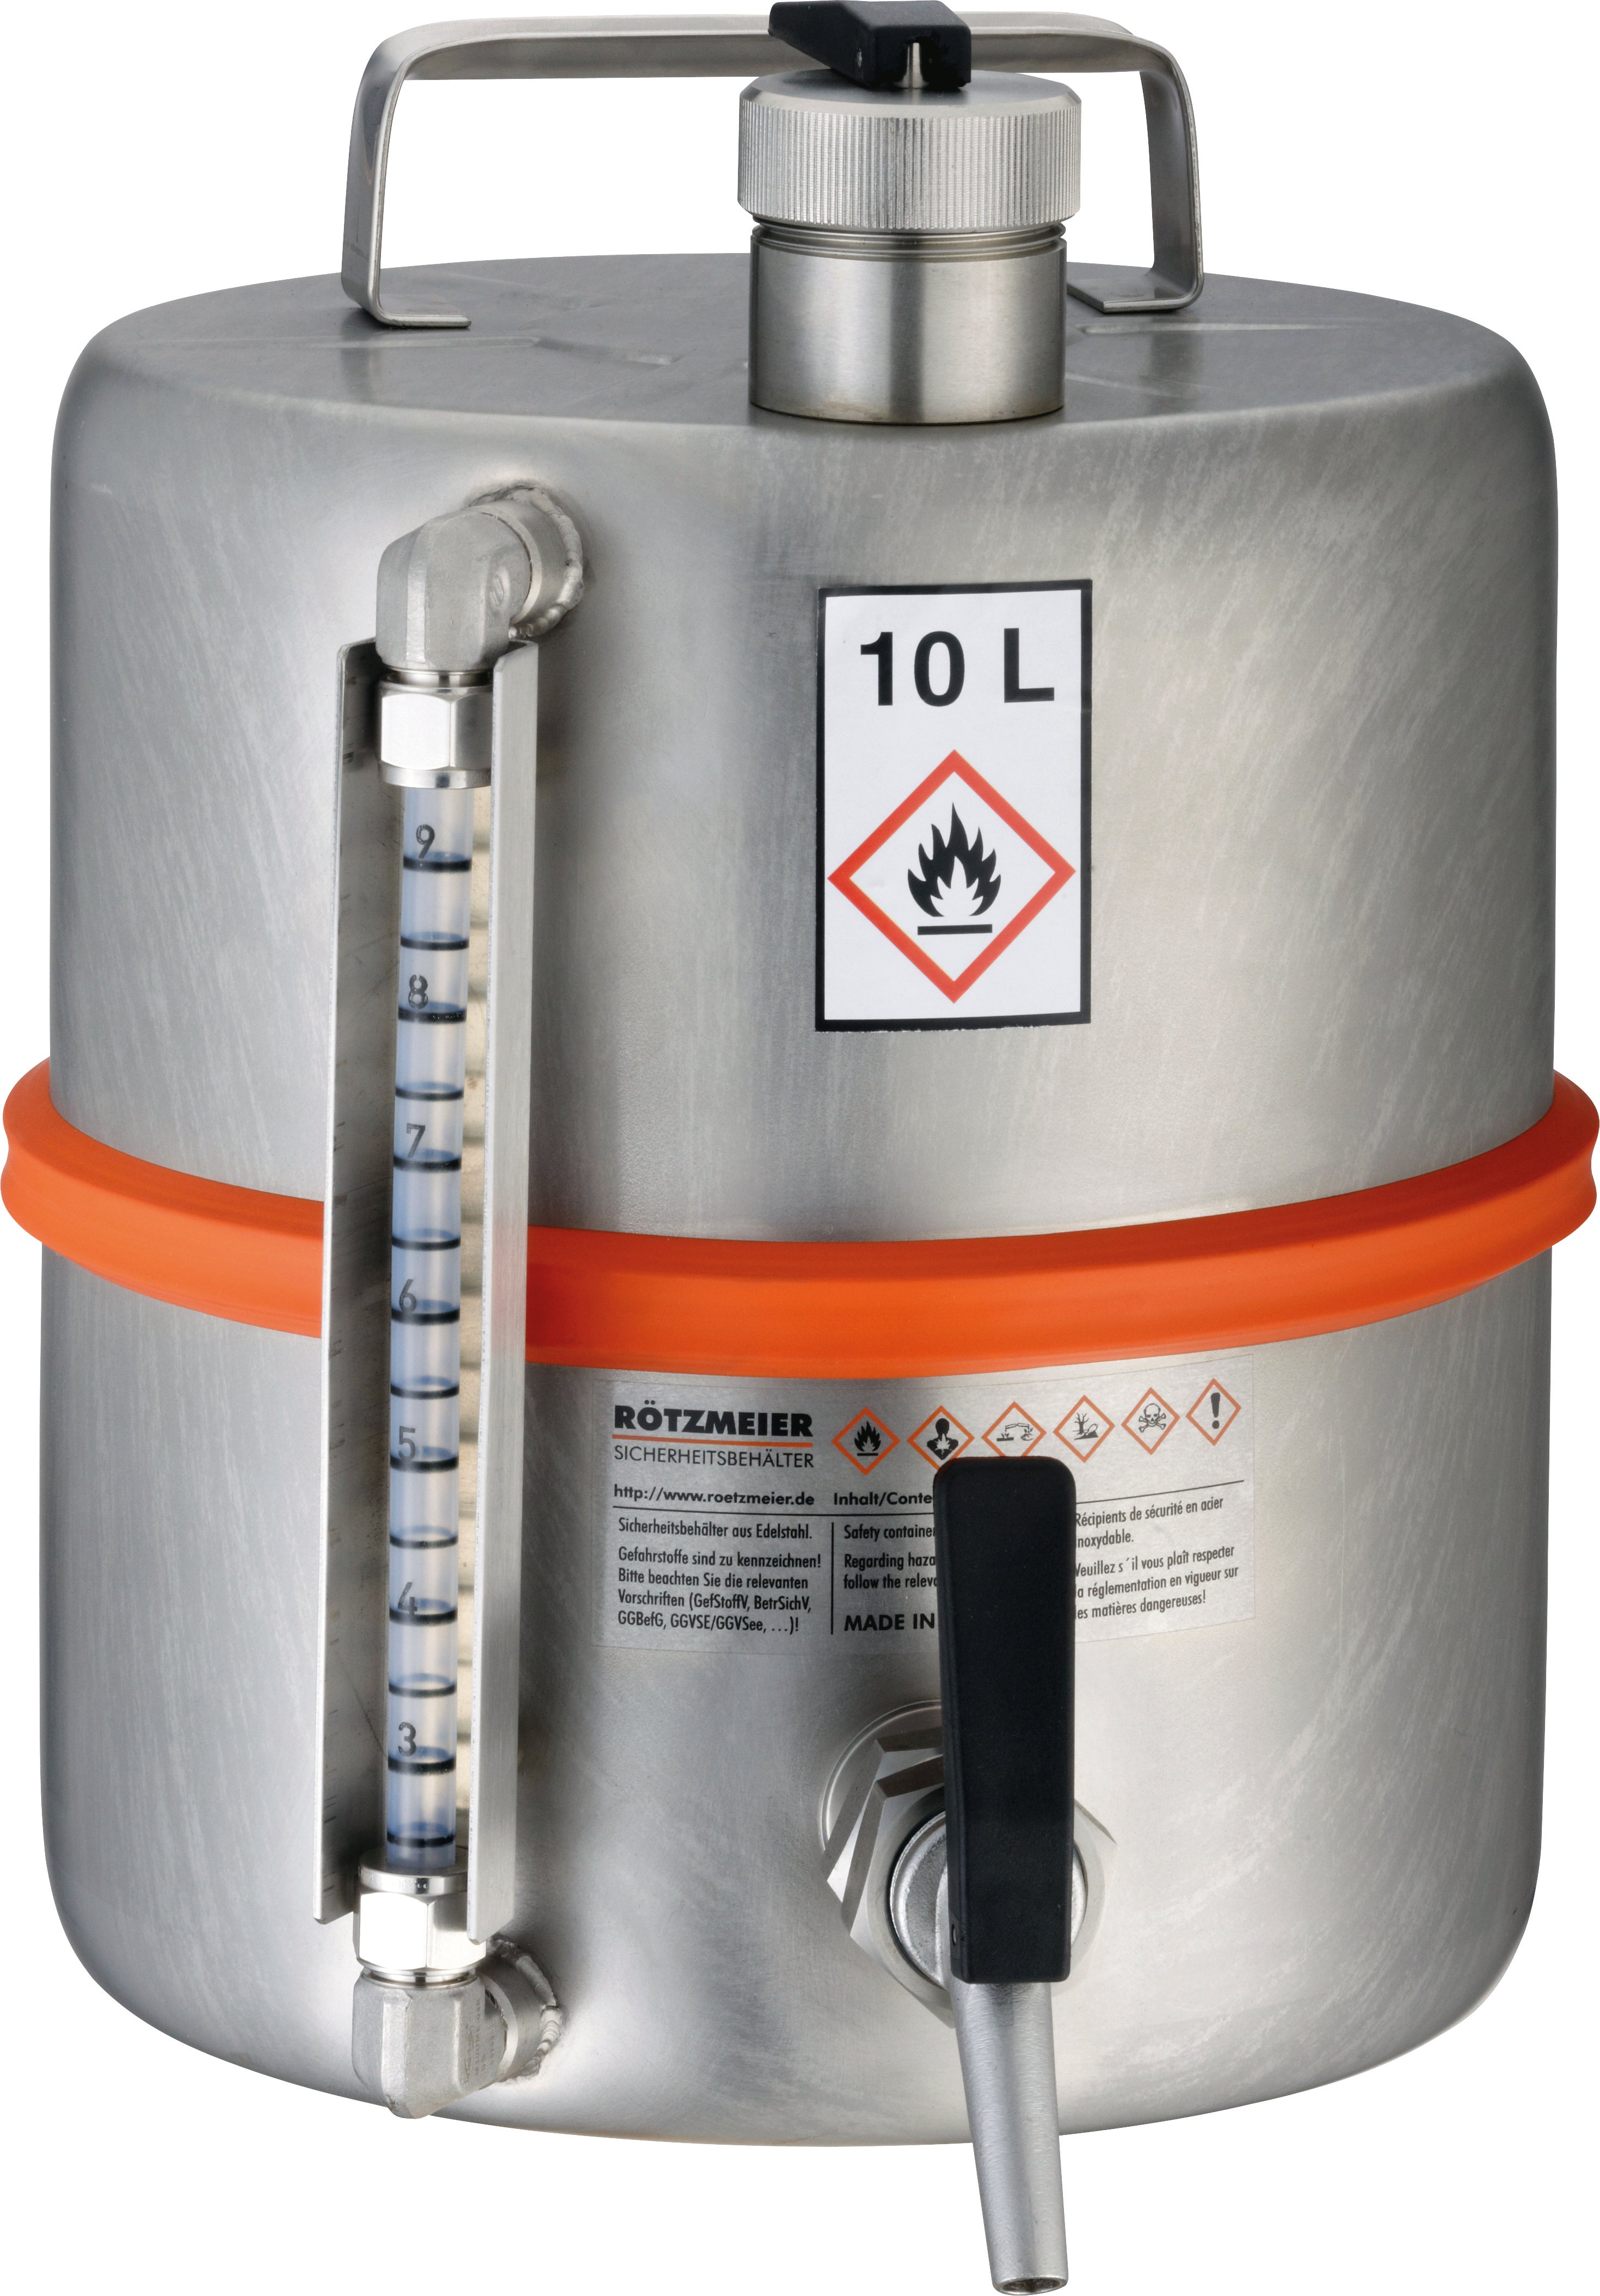 Safety container st.steel 1.4571, 10 L, stainless steel 1.4571 mat